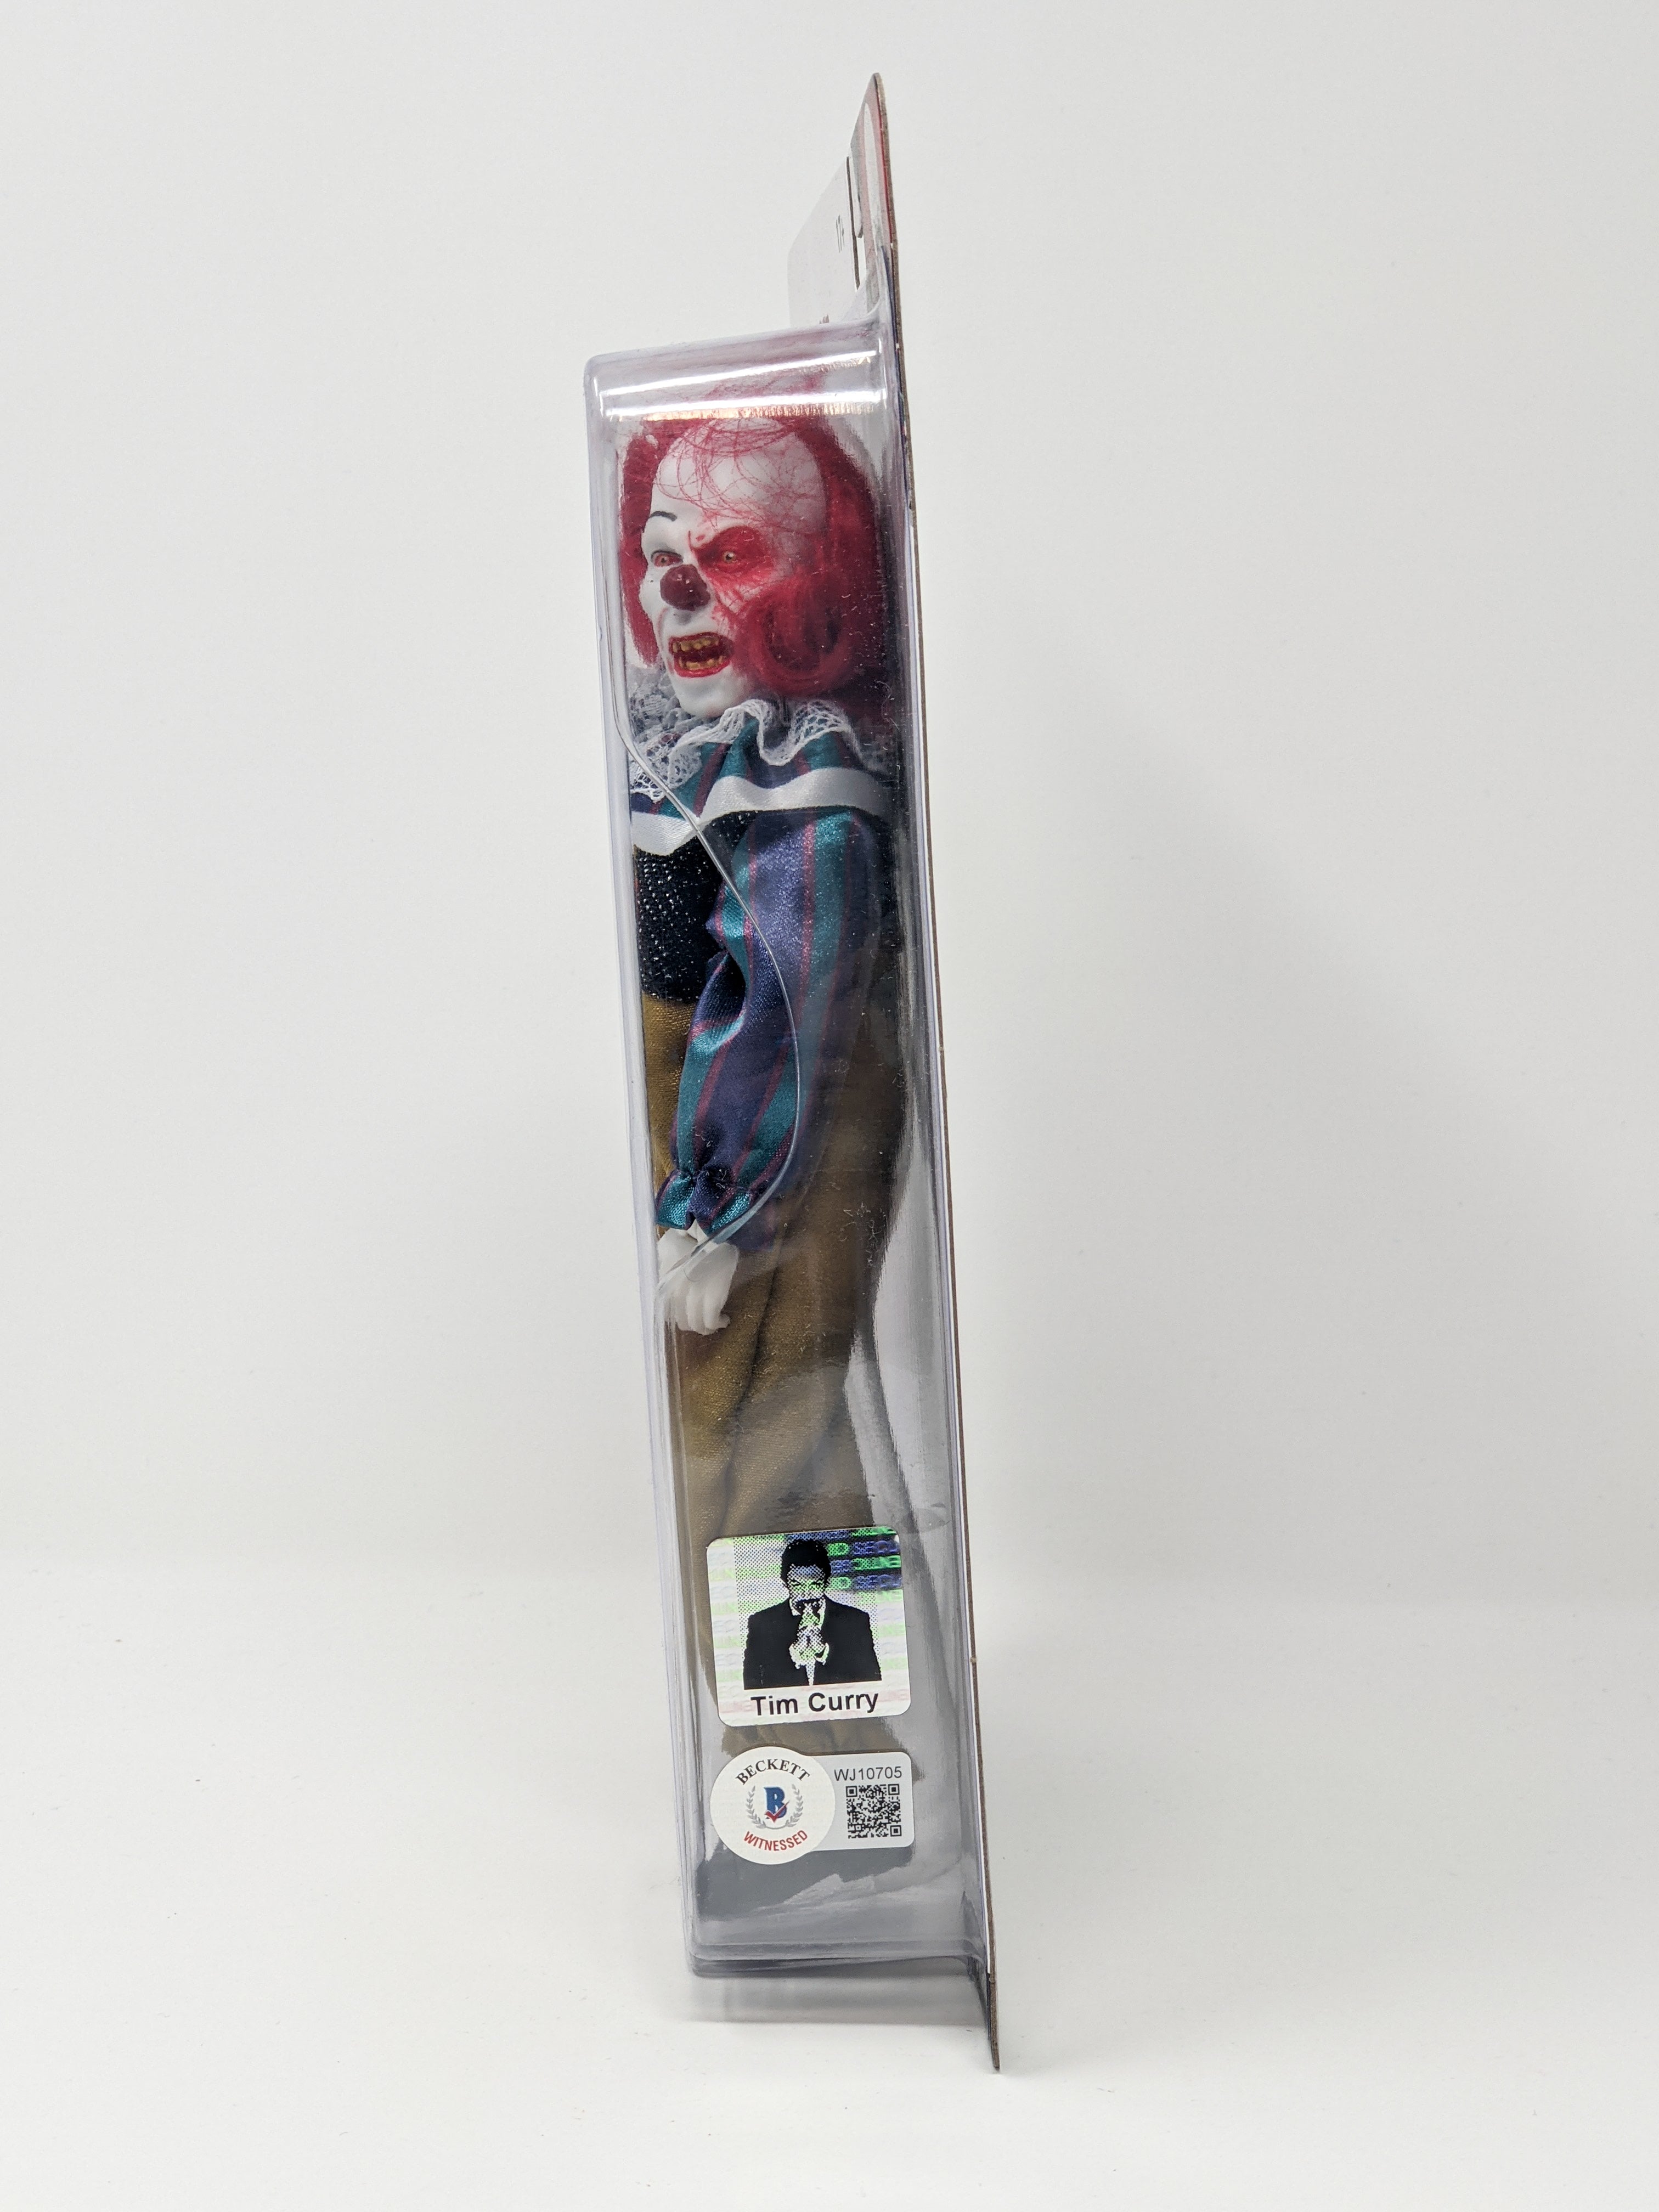 Tim Curry IT The Movie Signed Mego Action Figure Beckett COA Certified Autograph GalaxyCon